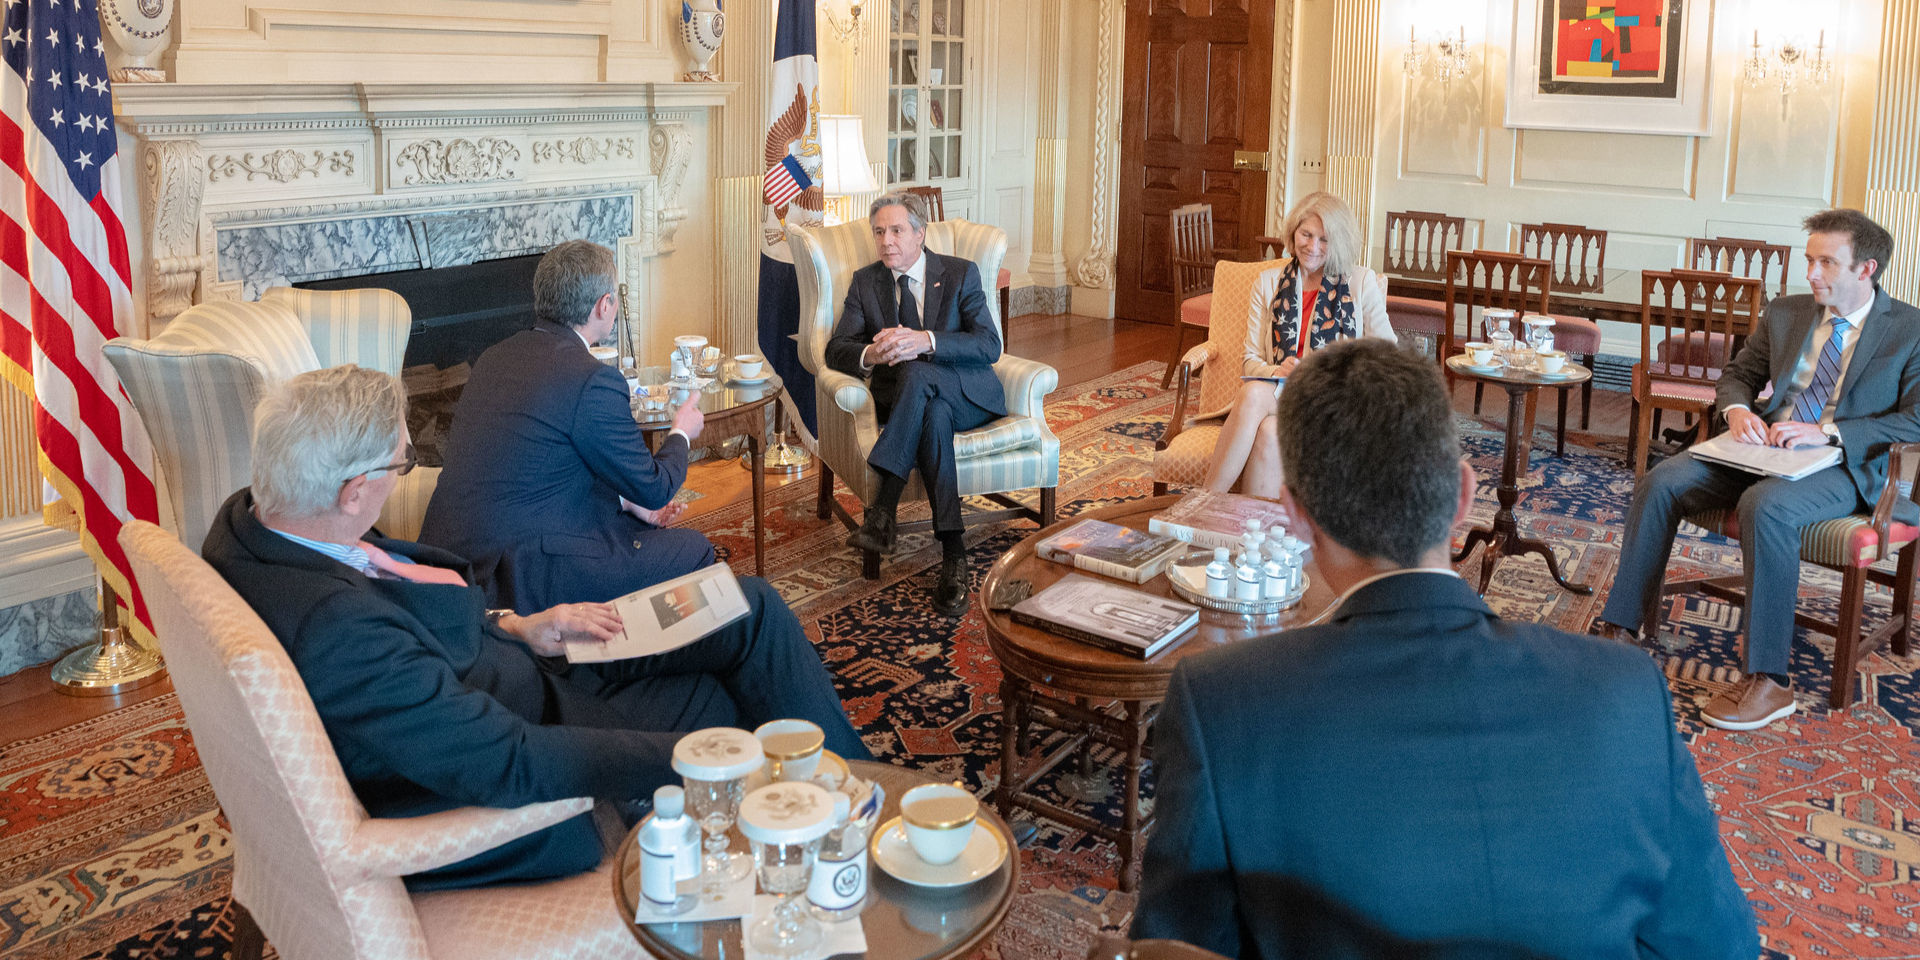 Six people sitting in a circle around a small wooden table, including Federal Councillor Ignazio Cassis talking to US Secretary of State Anthony Blinken.